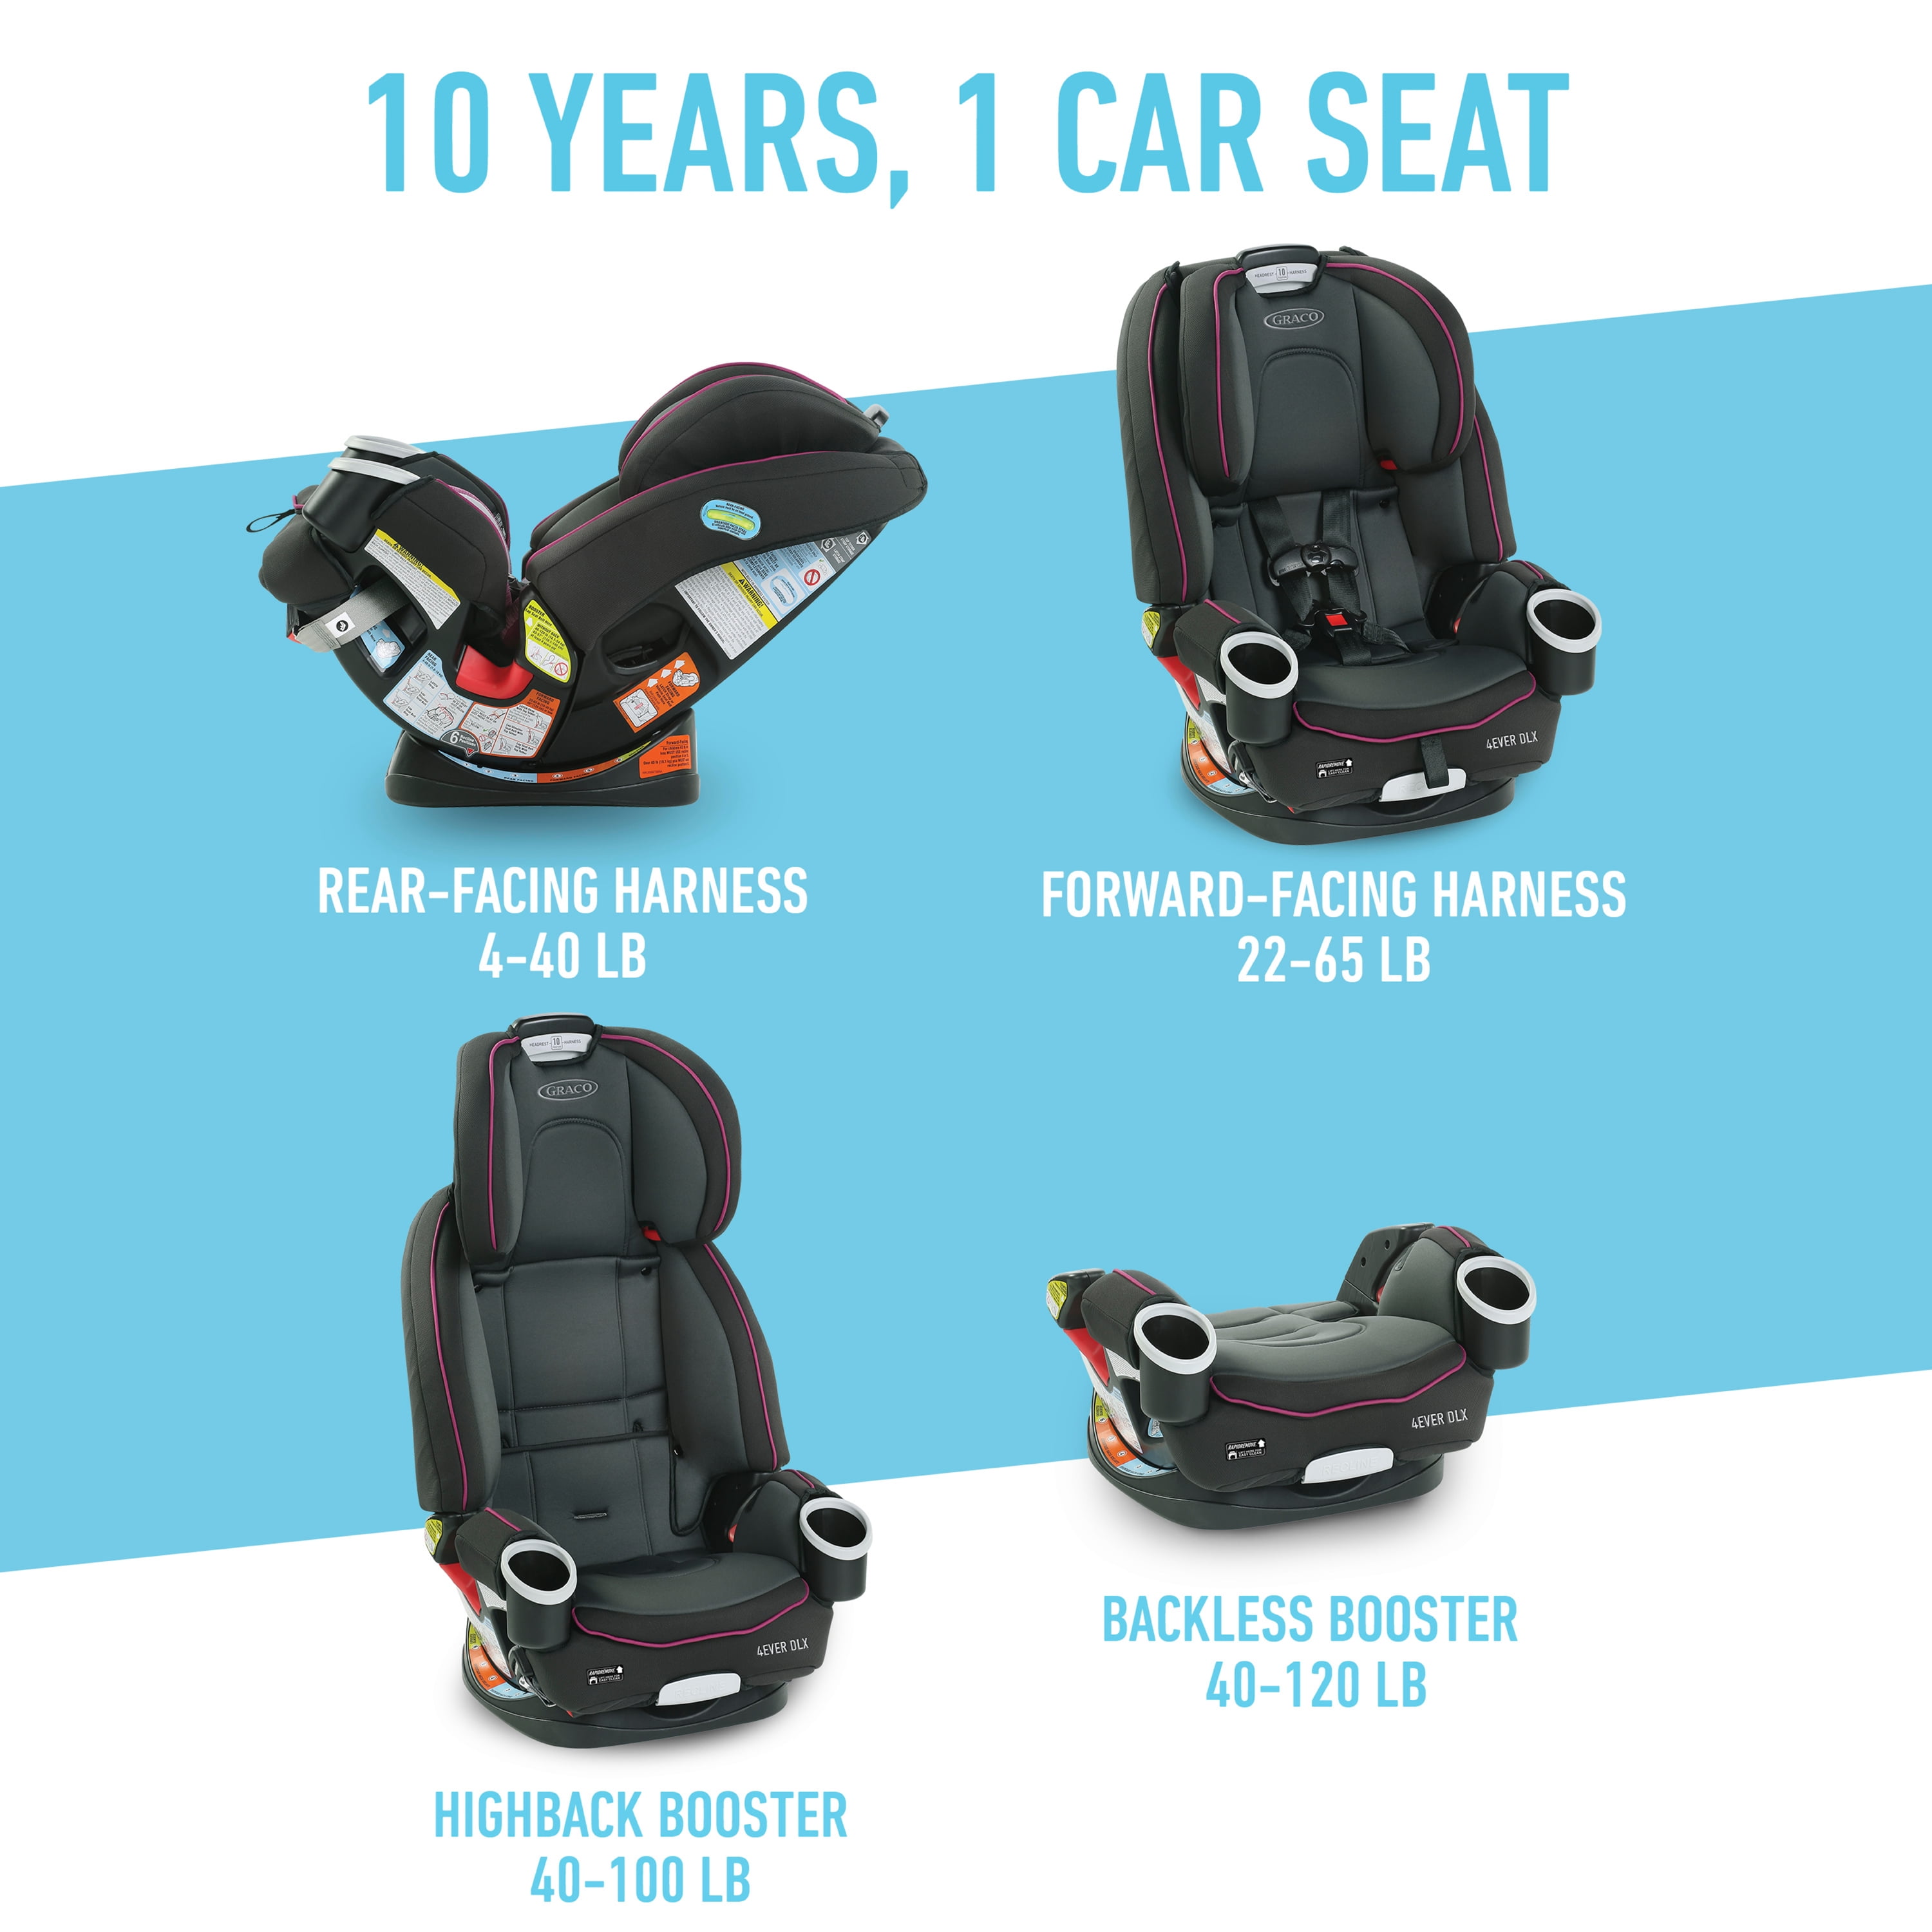 4 and 1 car seat